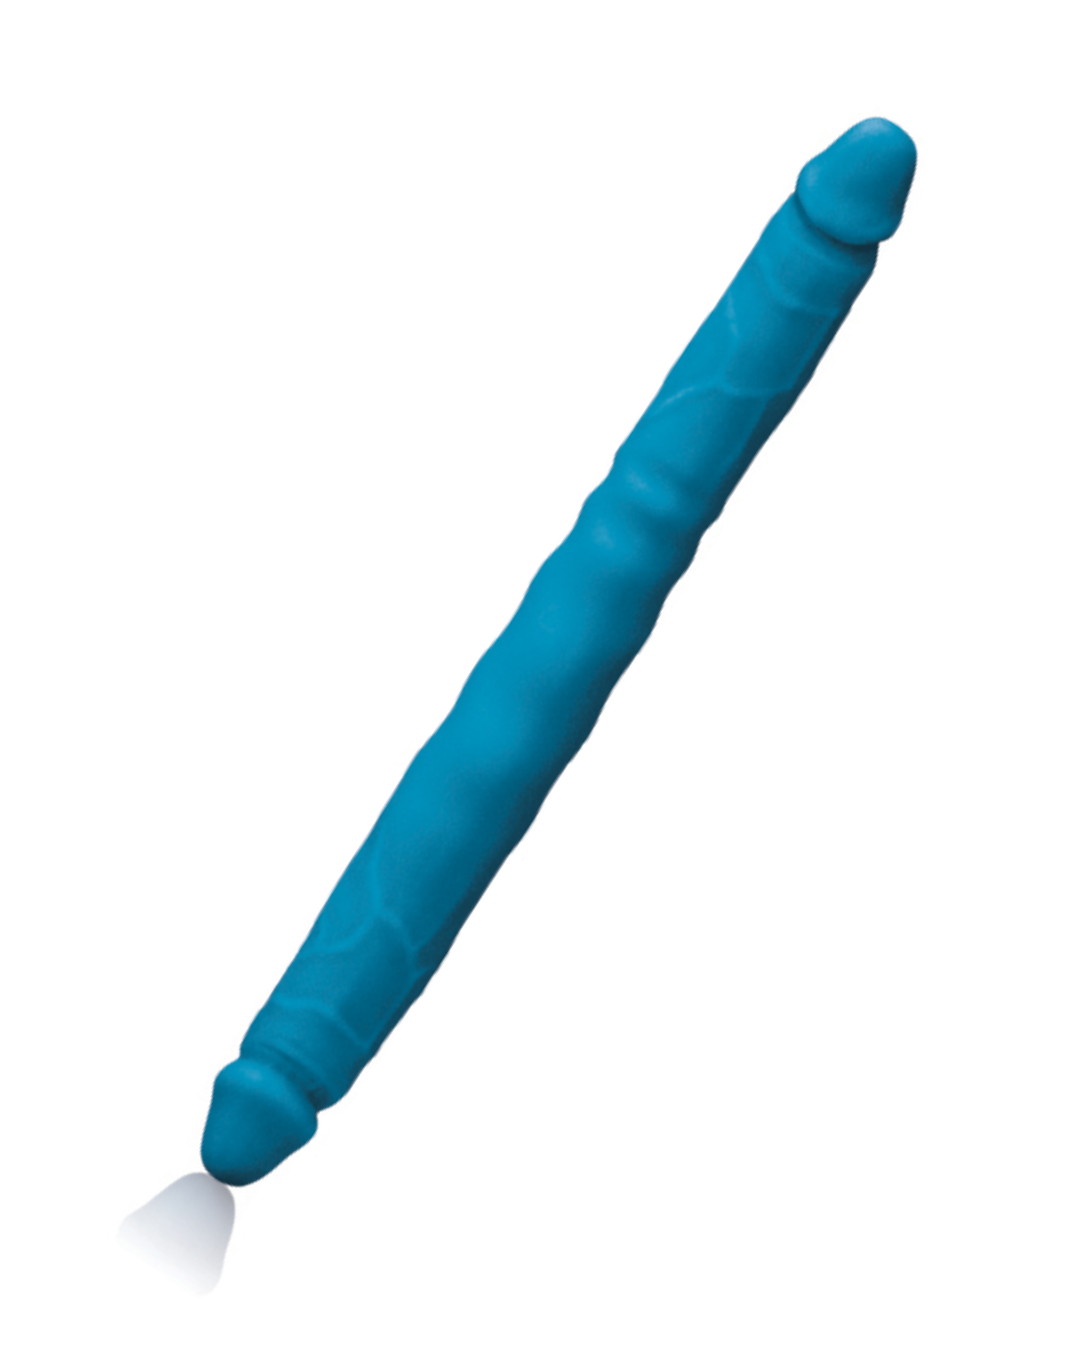 Colours 12 Inch Double Ended Dildo - Blue on white background